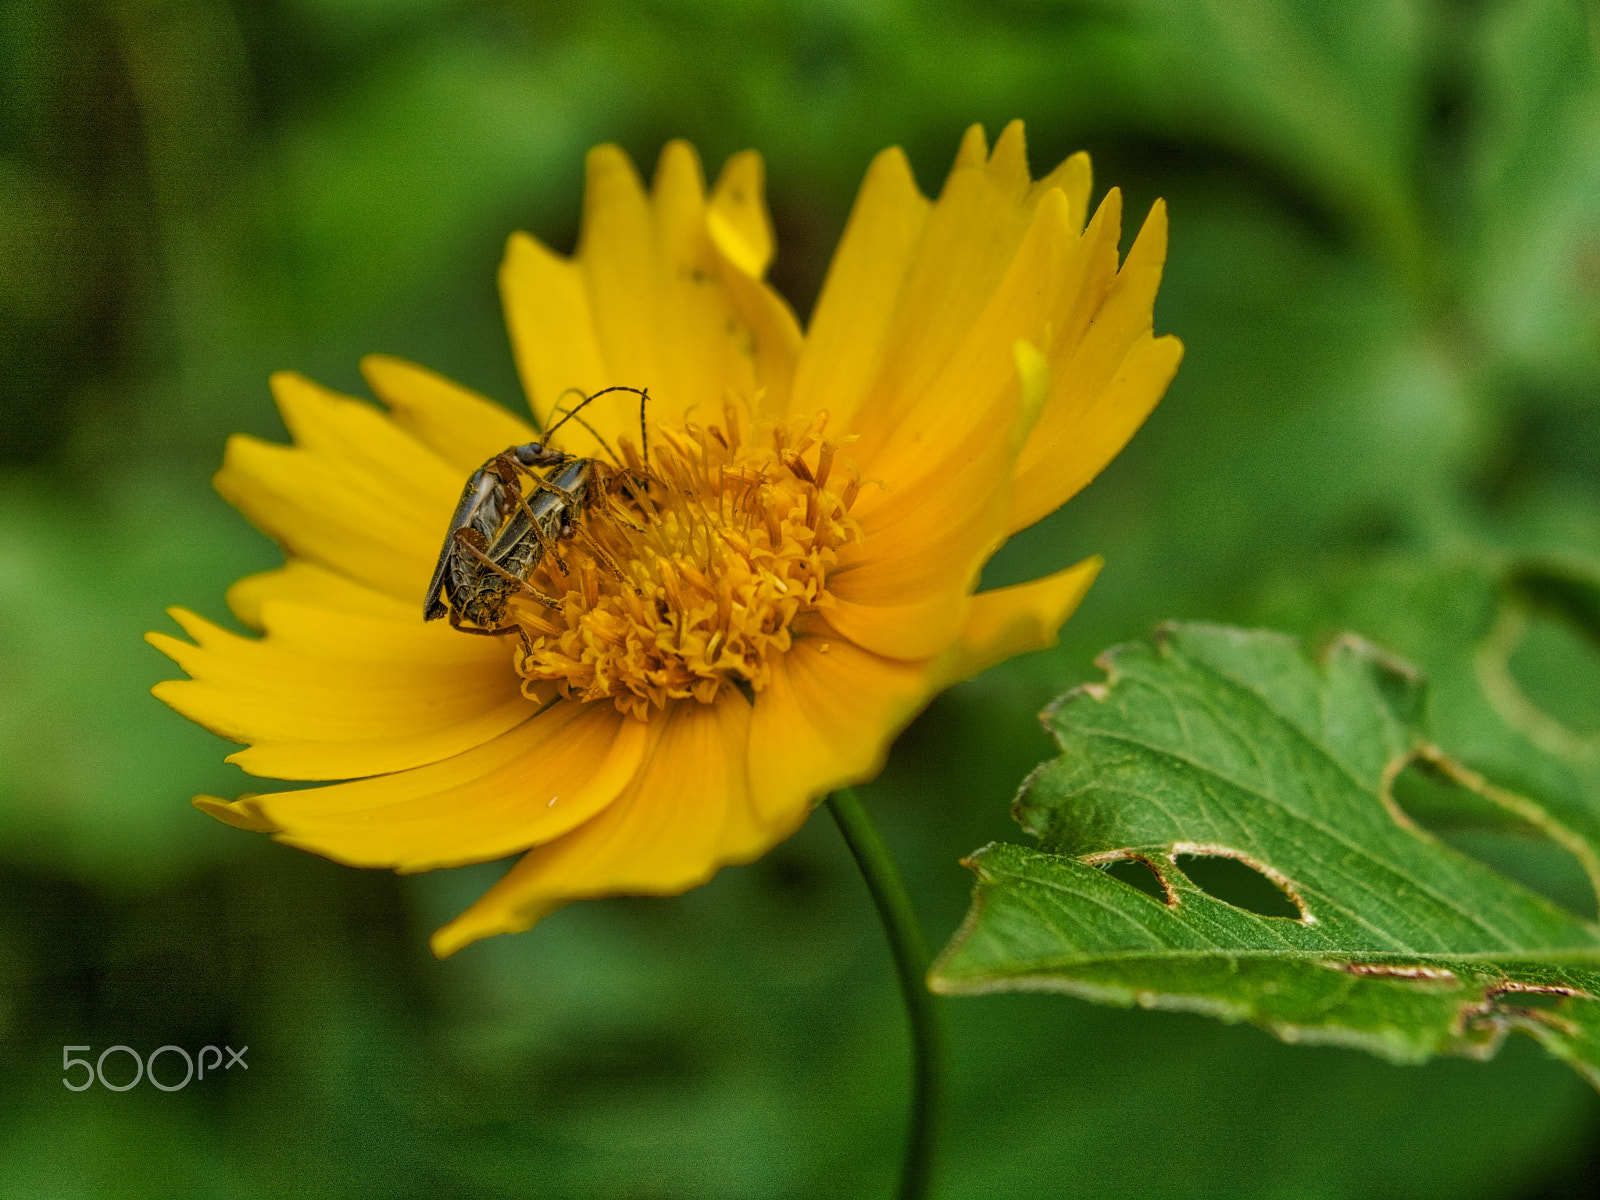 AF Zoom-Nikkor 35-135mm f/3.5-4.5 N sample photo. Yellow daisy insect copulation photography